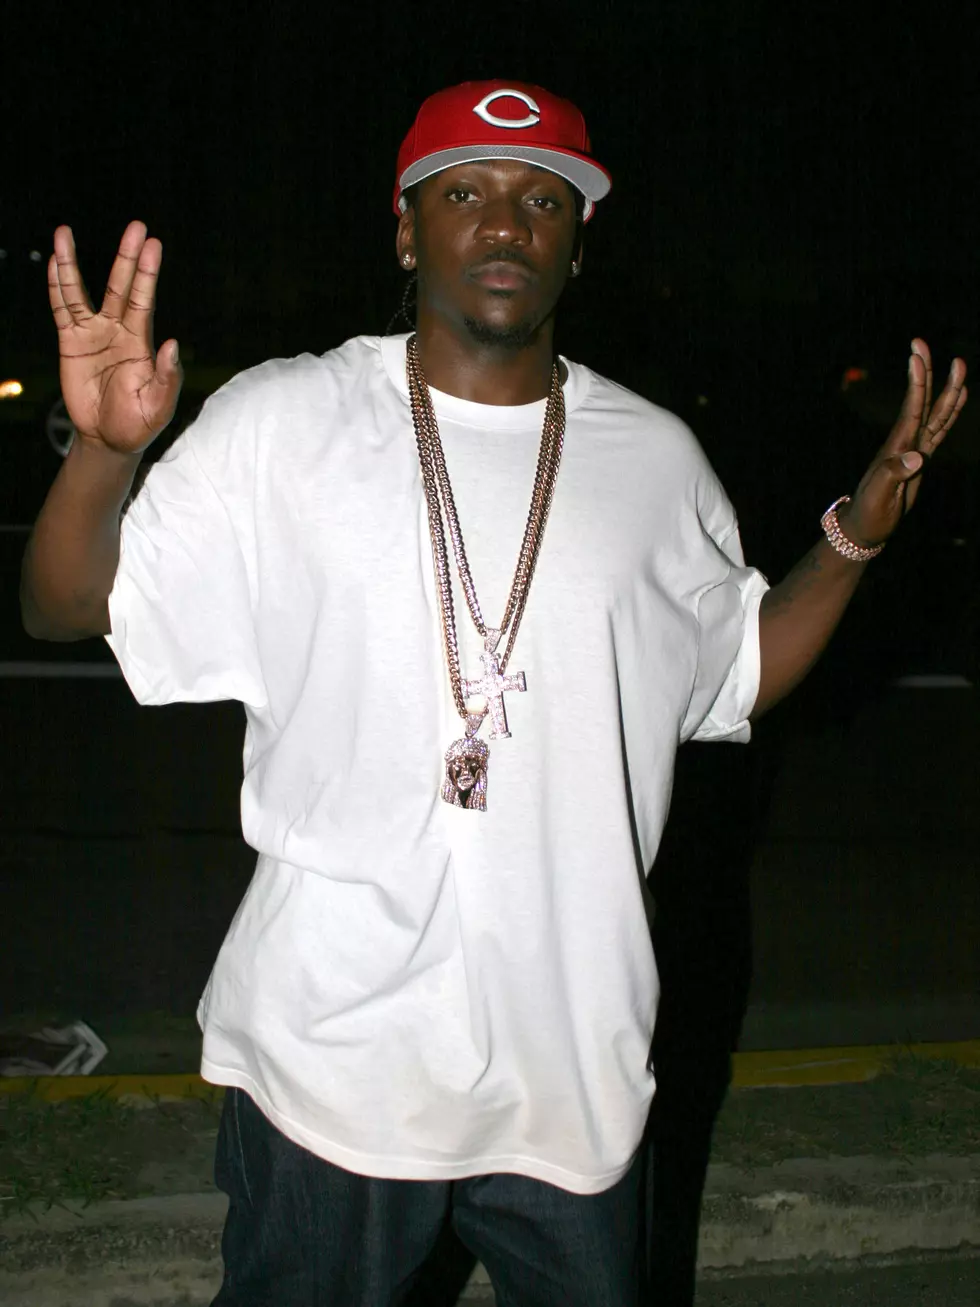 Remember When Oversized White T-Shirts Were Go-To Hip-Hop 'Fit - XXL